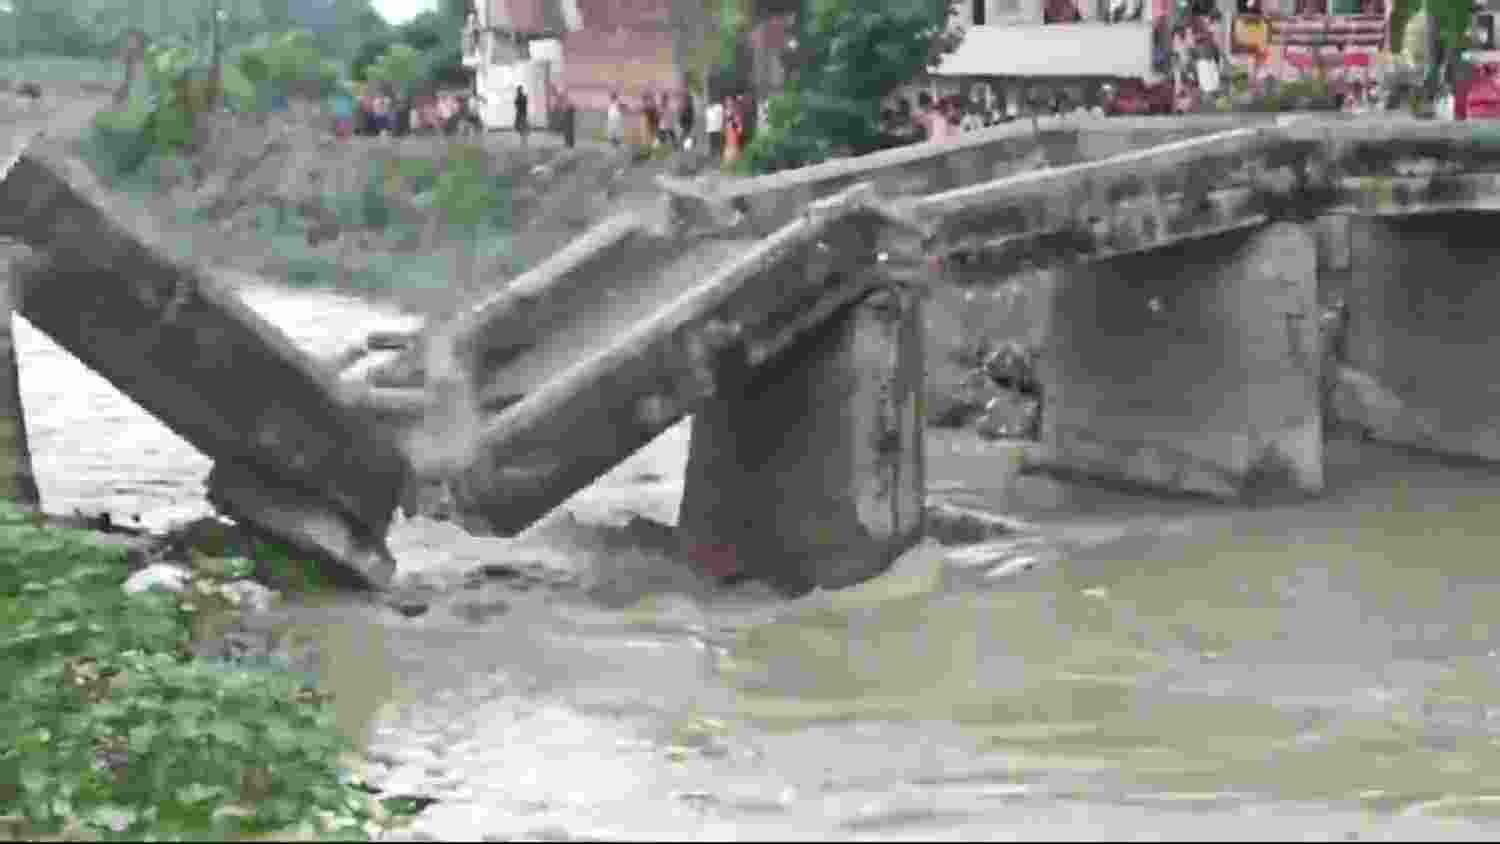 Another bridge collapses in Bihar, 10th in 16 days